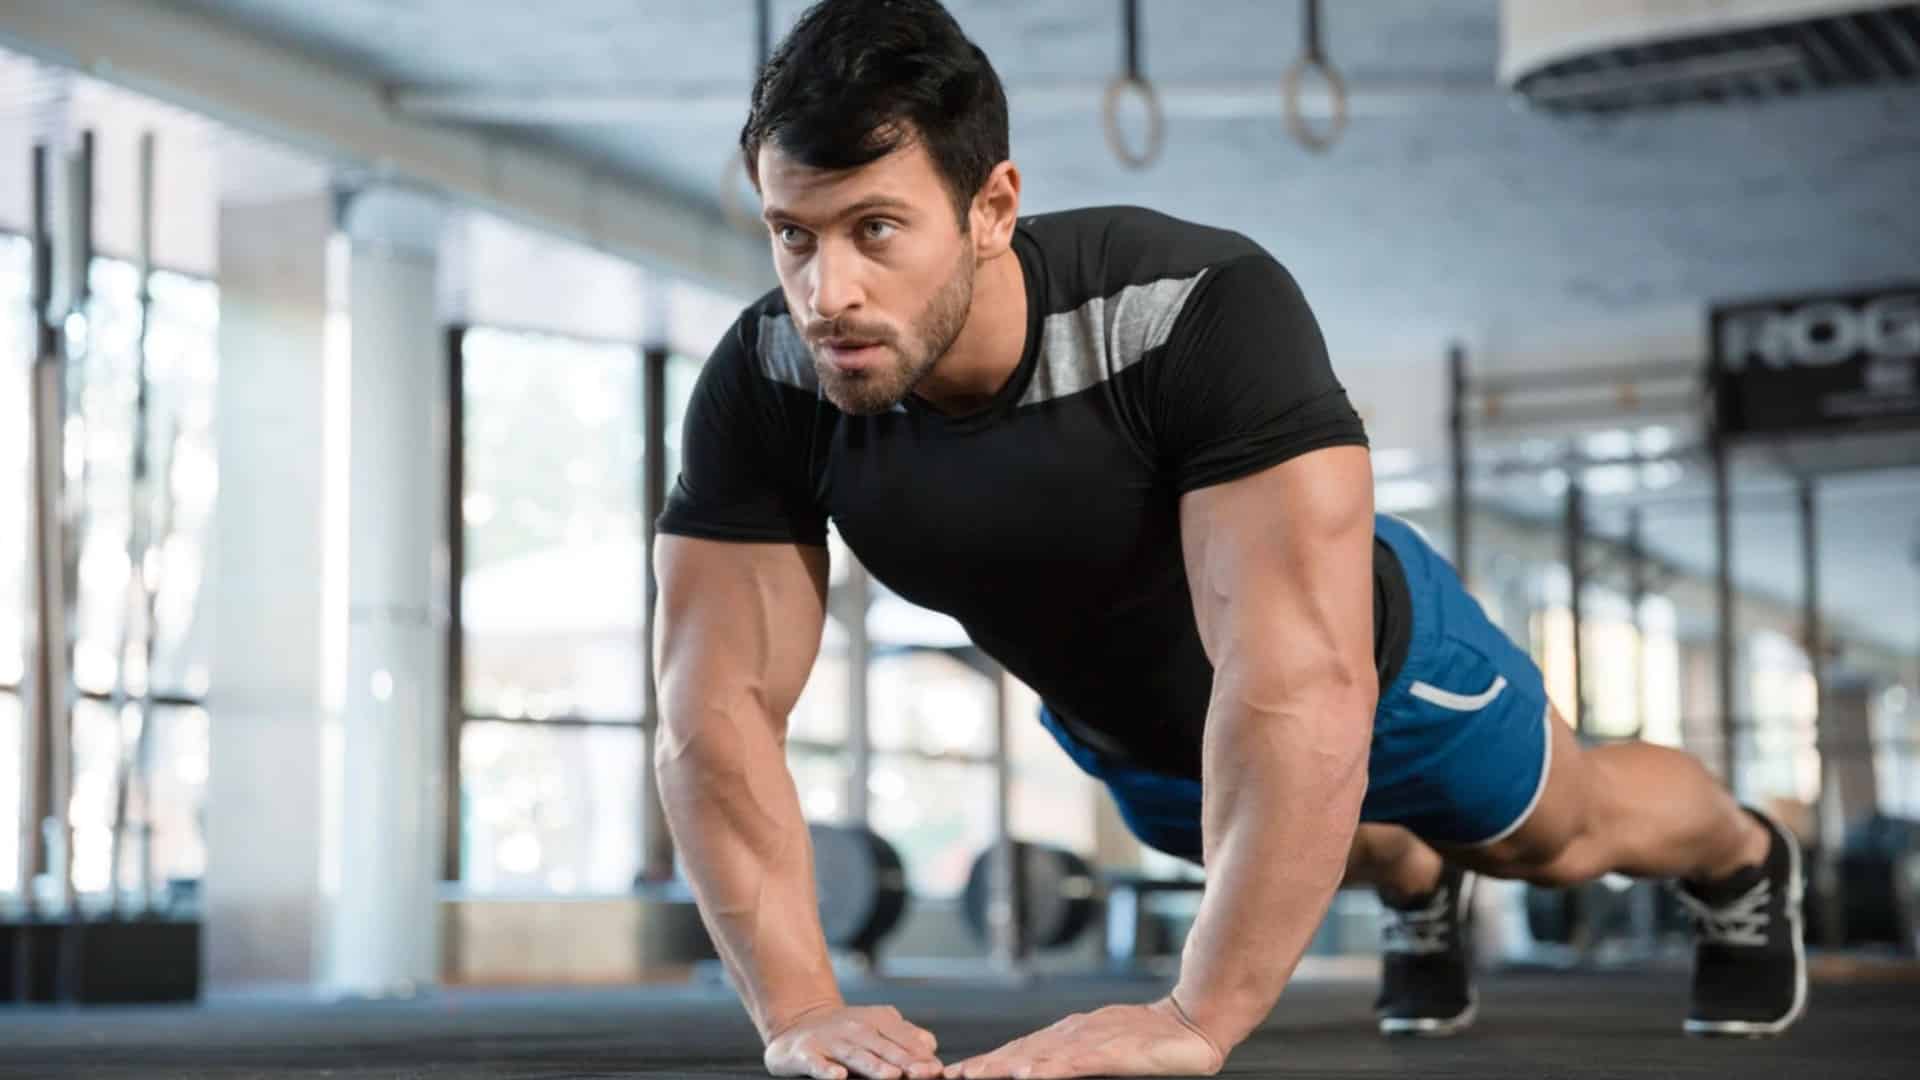 Most Effective Tricep Push-Ups To Build Strong, Muscular Arms